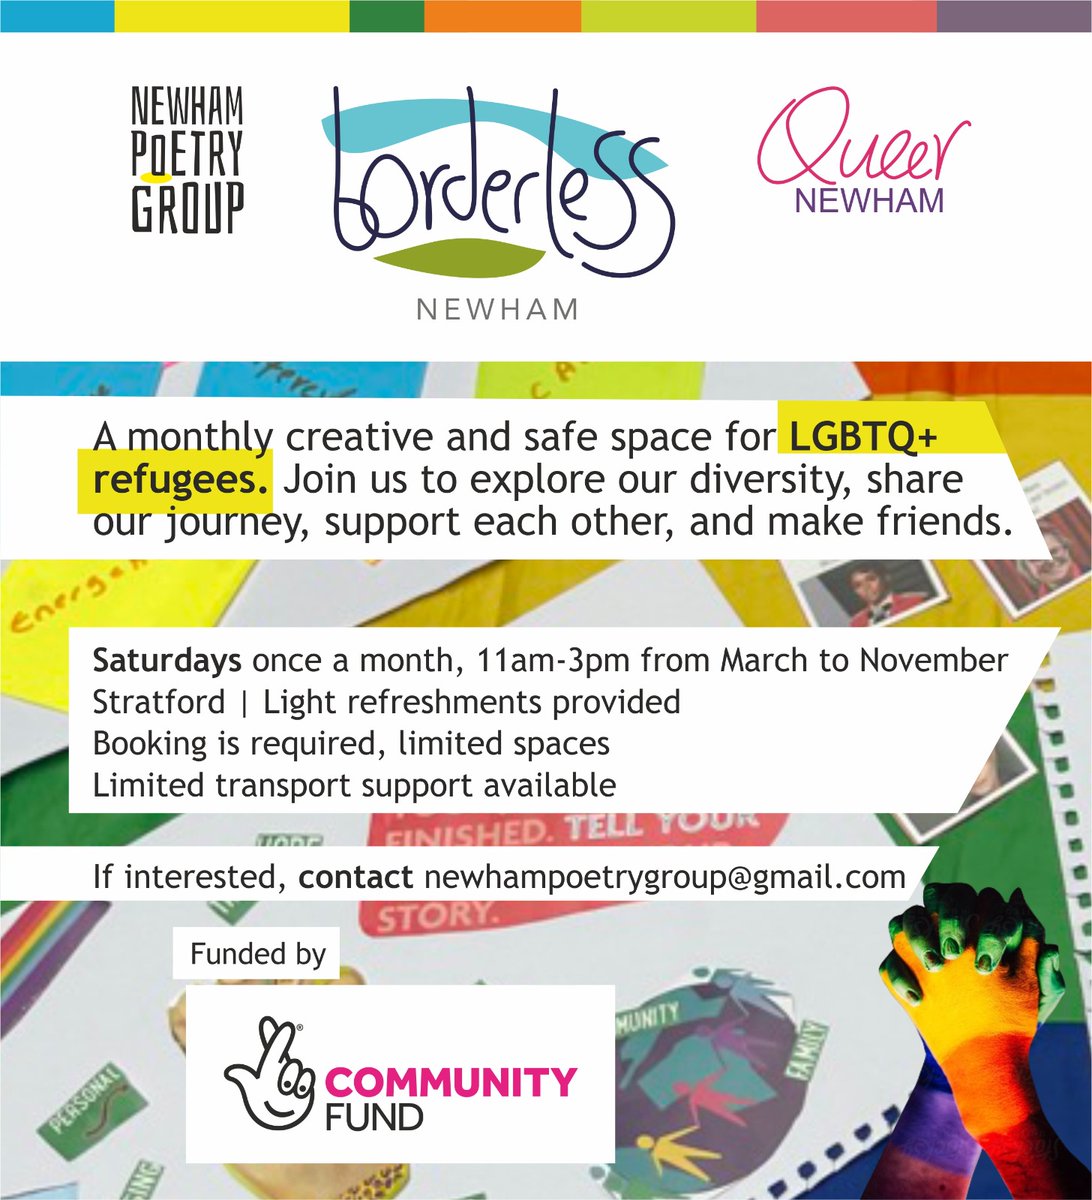 Great News for #Newham We are leading #LGBTQrefugees projects -  we'll be gathering on Saturdays once a month. Feel free to share the poster and invite LGBTQ+ friends and allies. #BorderlessGrp Thanks to @TNLComFund